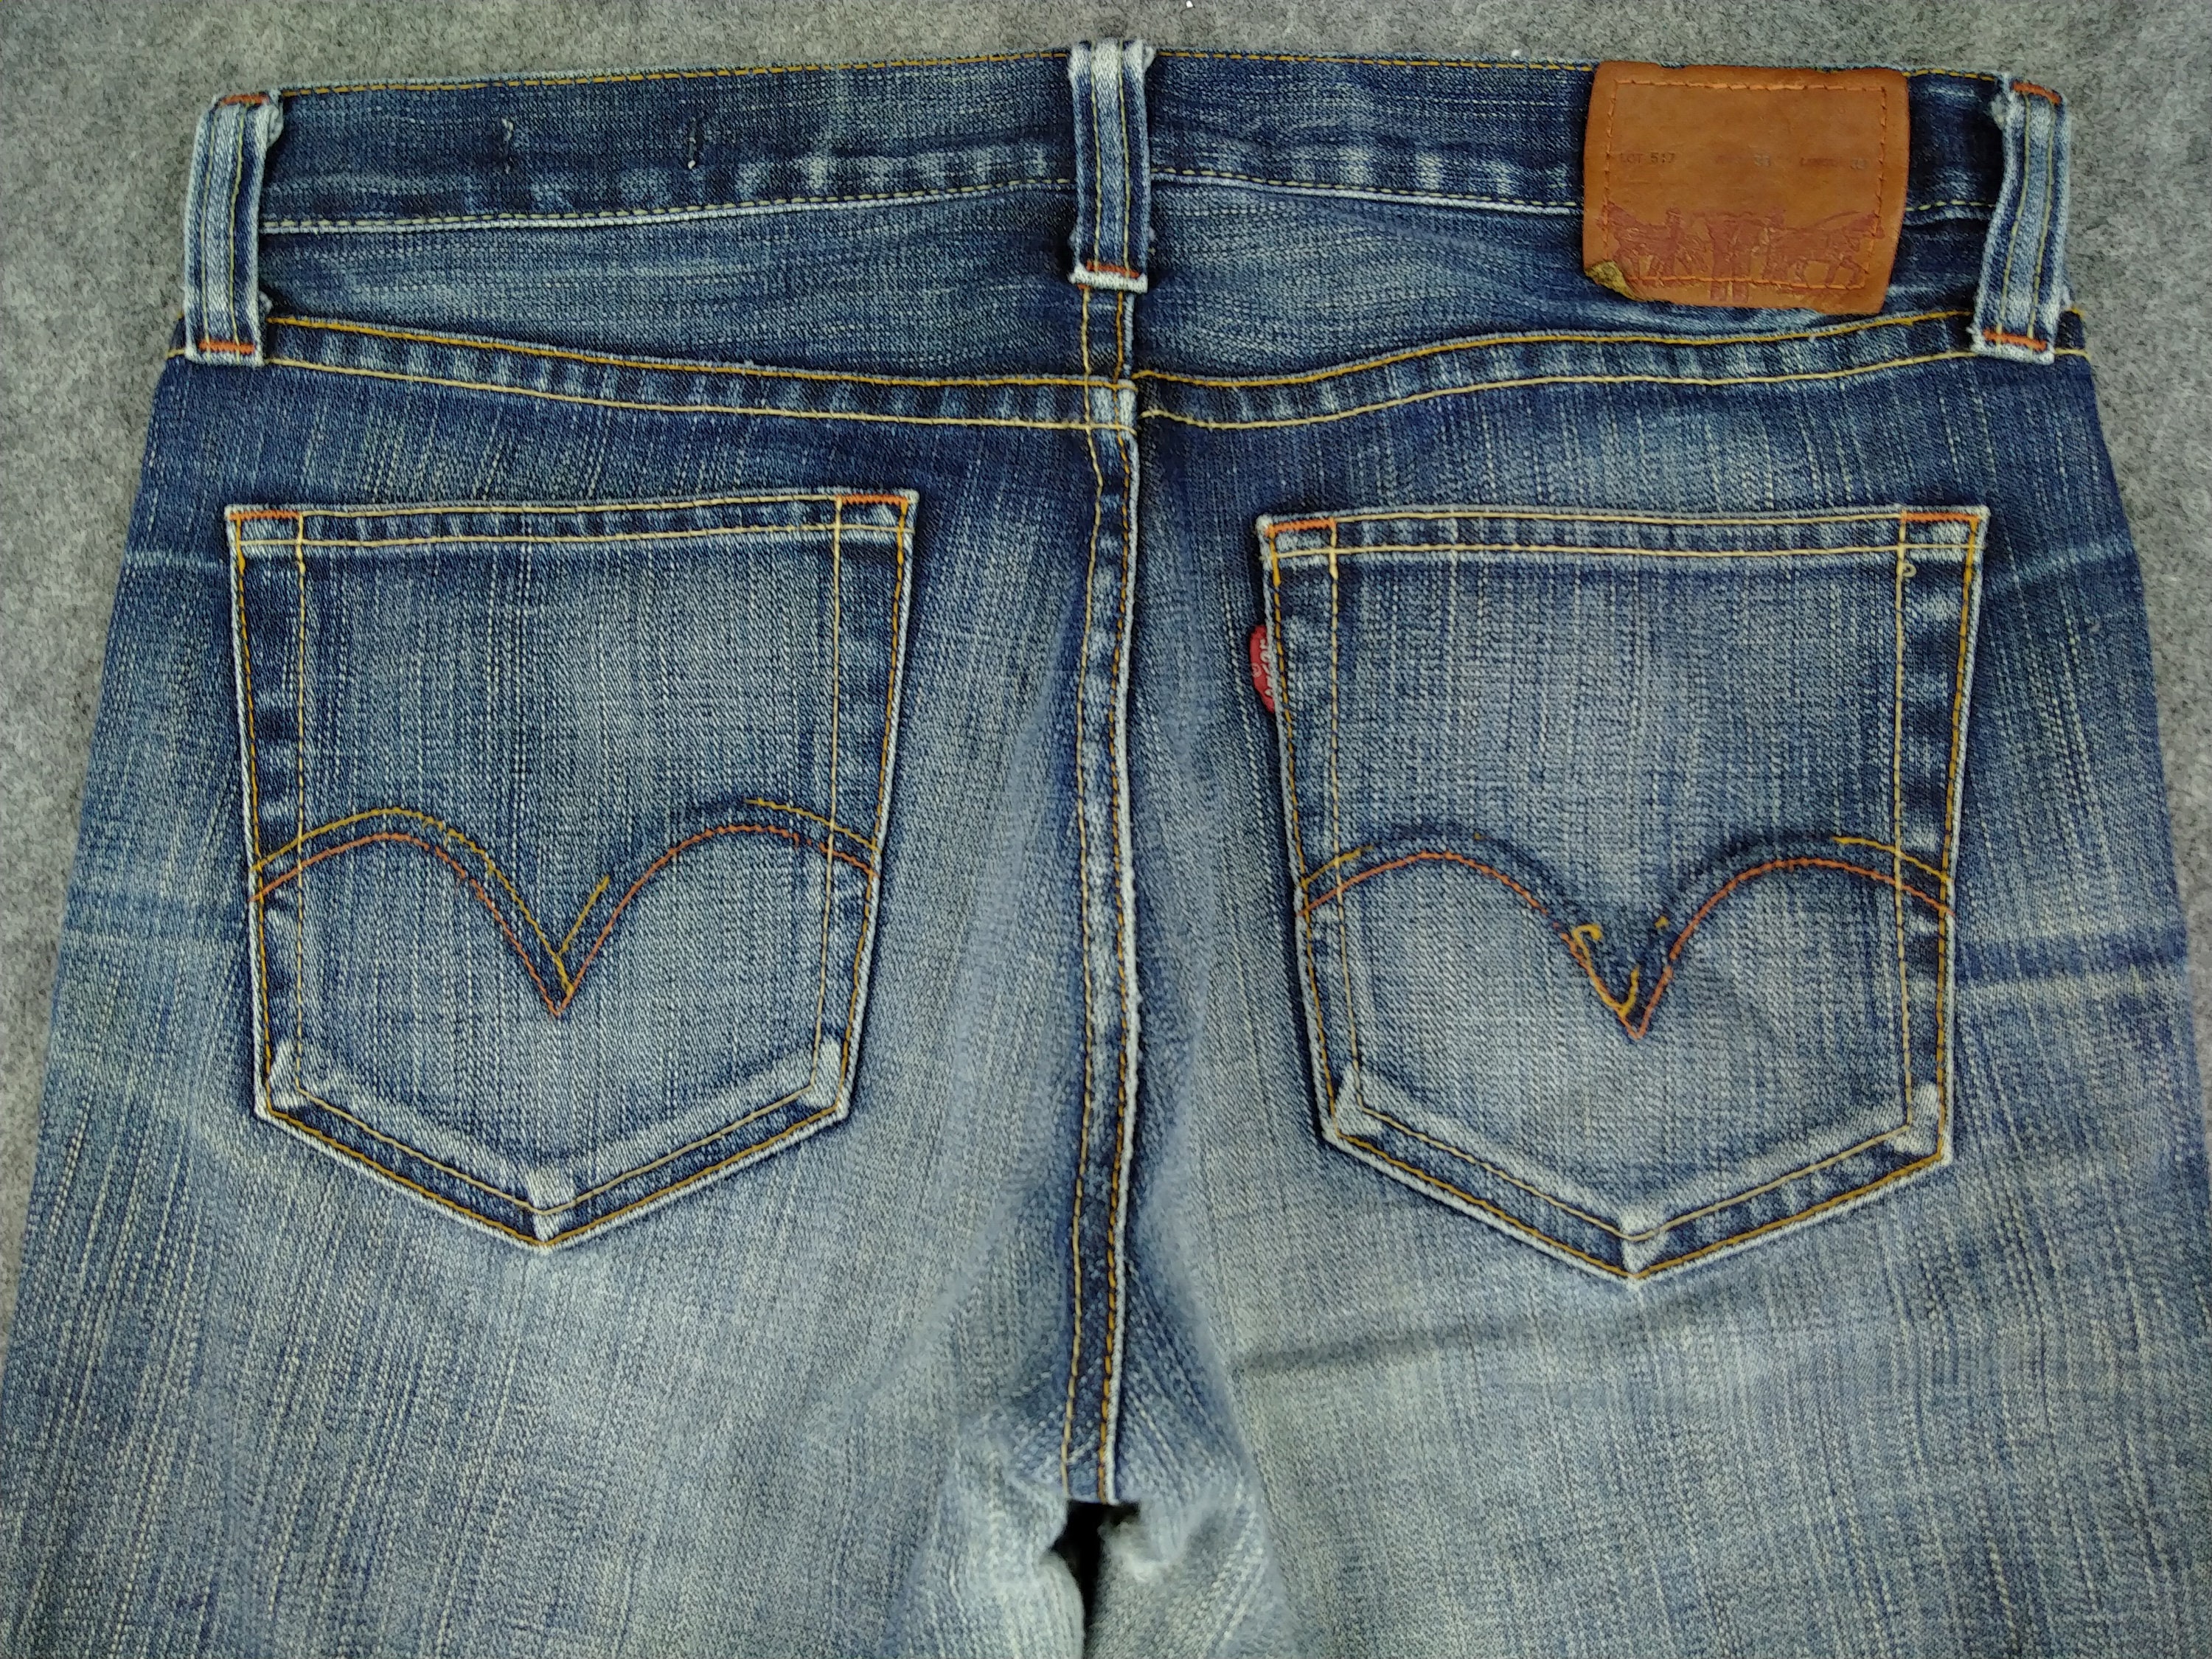 Vintage Levi's 517 Jeans 34x29.5 Whisker Distressed Denim Red Tab Faded ...